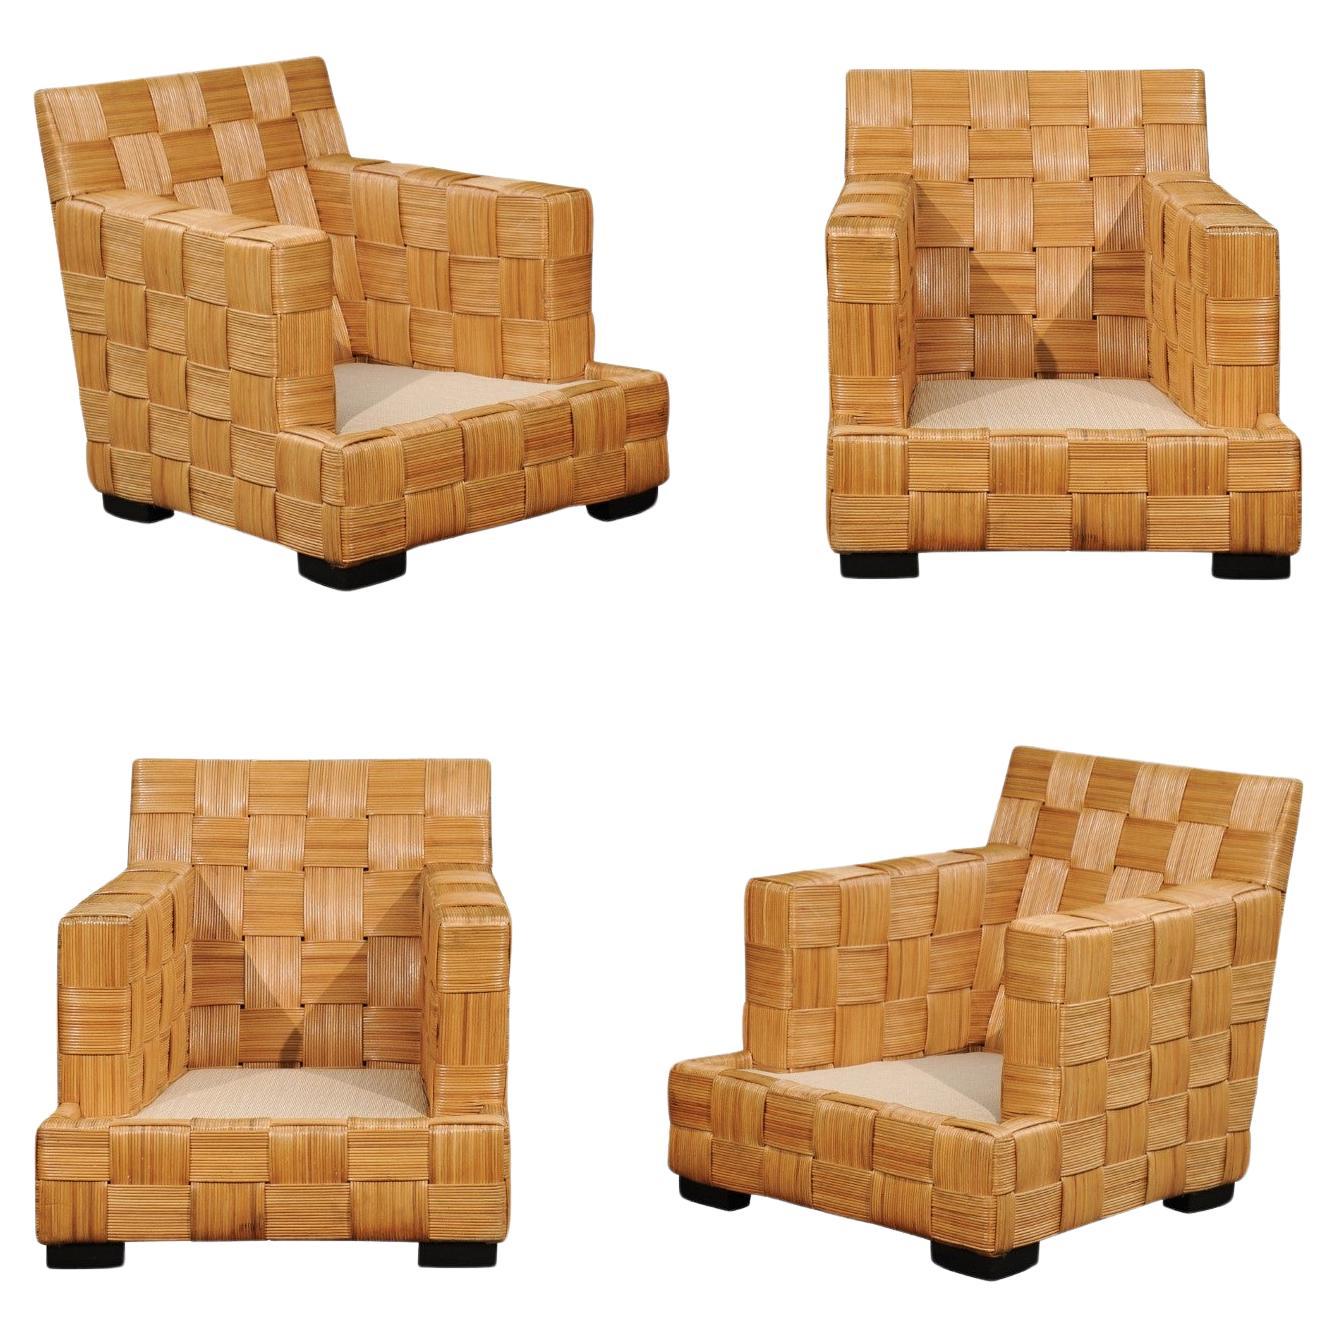 Unforgettable Set of of 4 Block Island Cane Chairs by John Hutton for Donghia